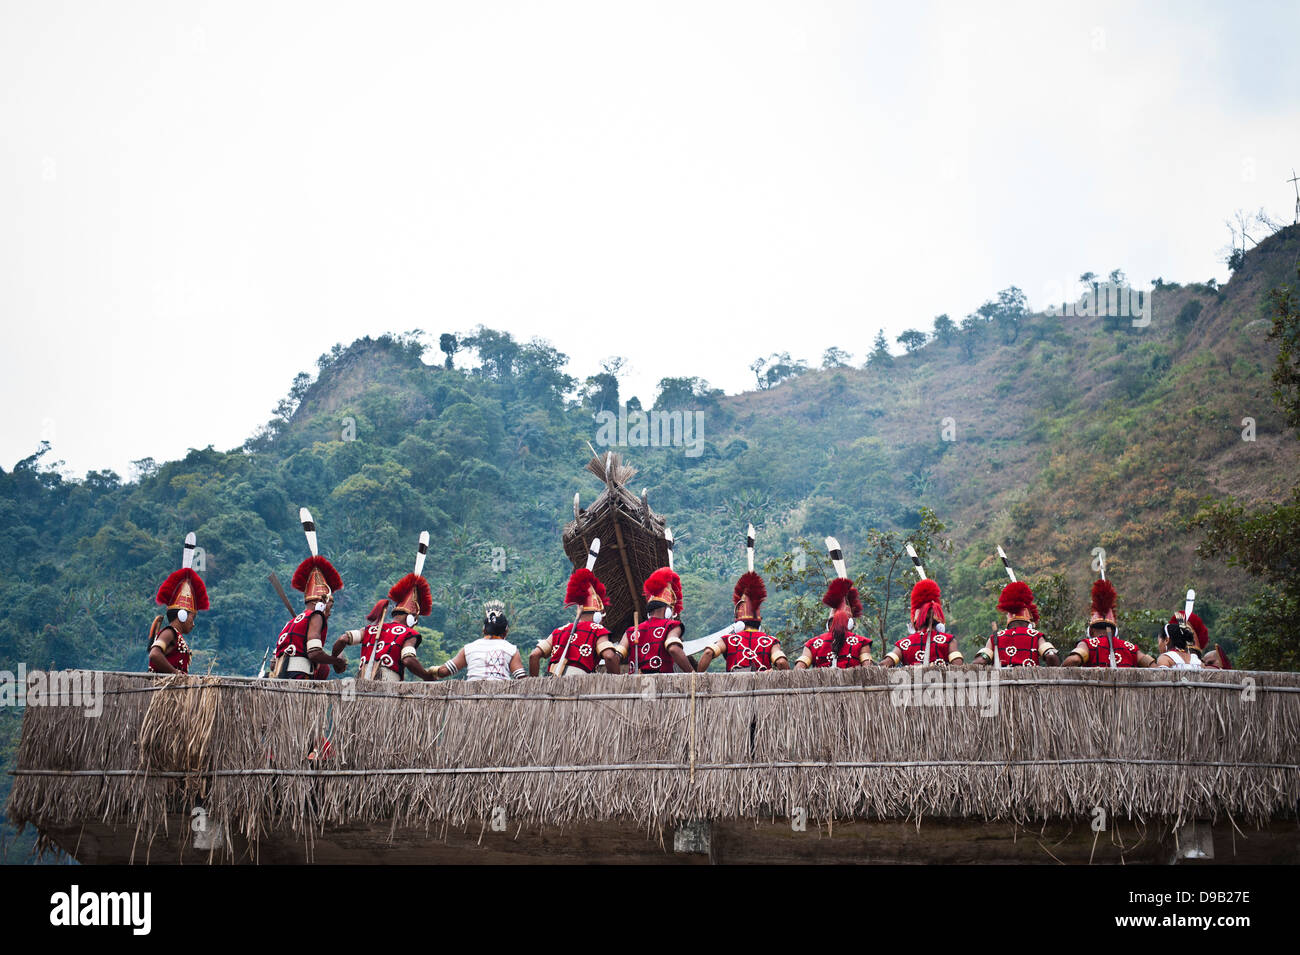 Naga tribal people in traditional outfit performing in Hornbill Festival, Kohima, Nagaland, India Stock Photo